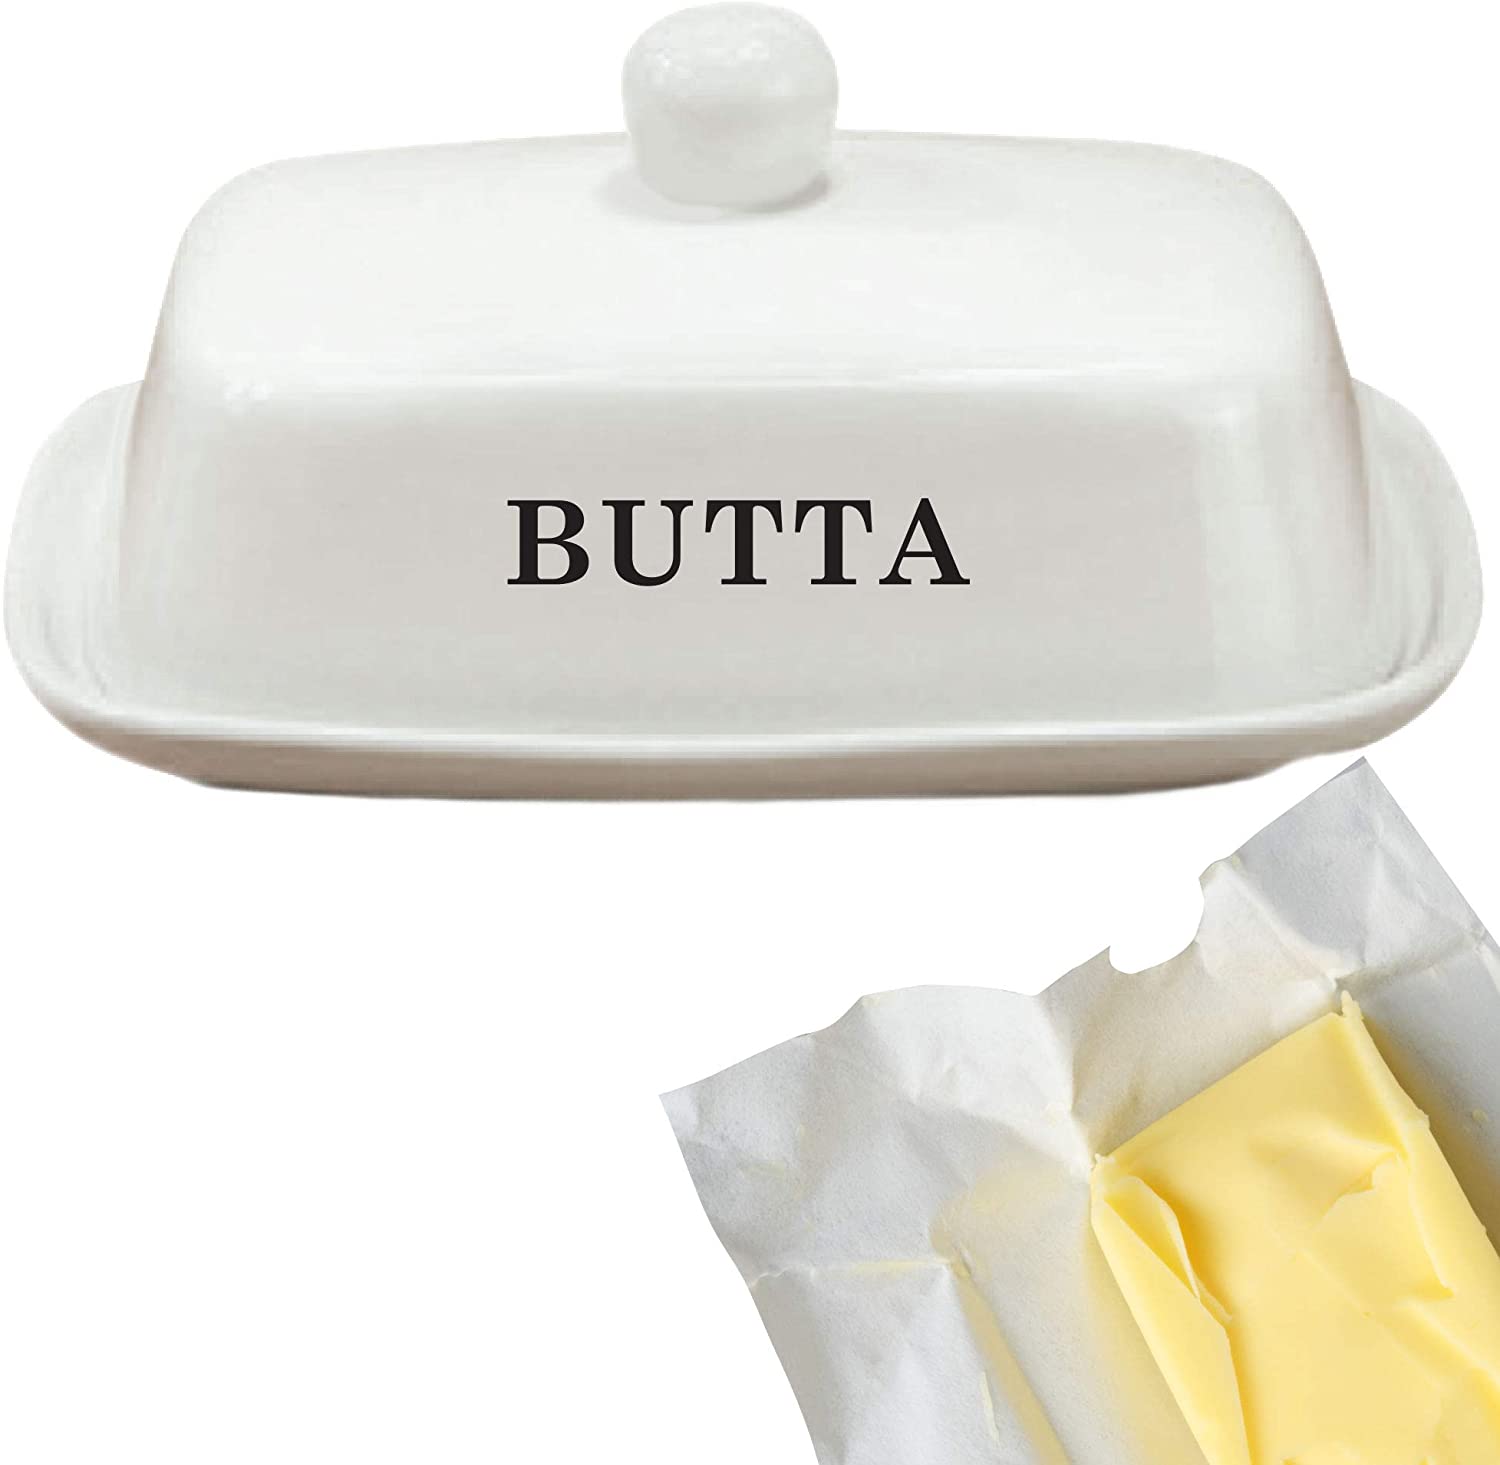 butter-dishes-butta